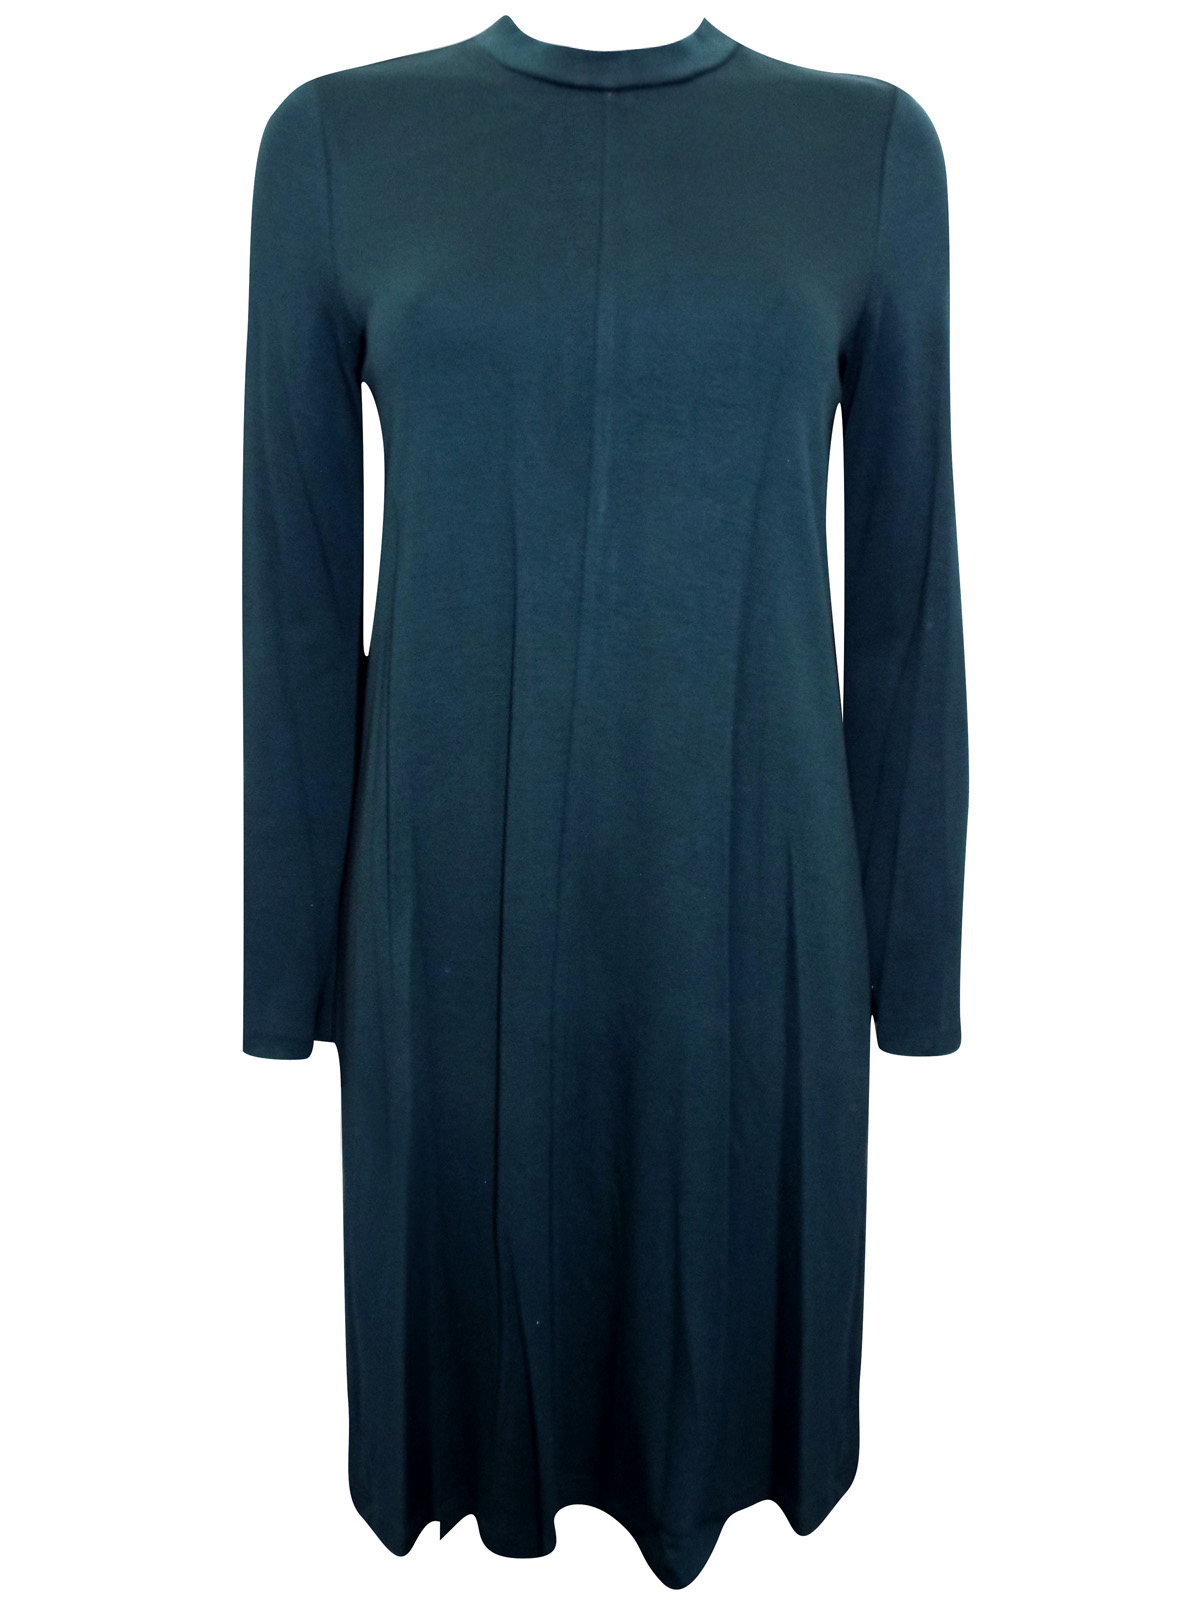 Marks and Spencer - - M&5 ASSORTED Ladies Plain Dresses - Size 10 to 22